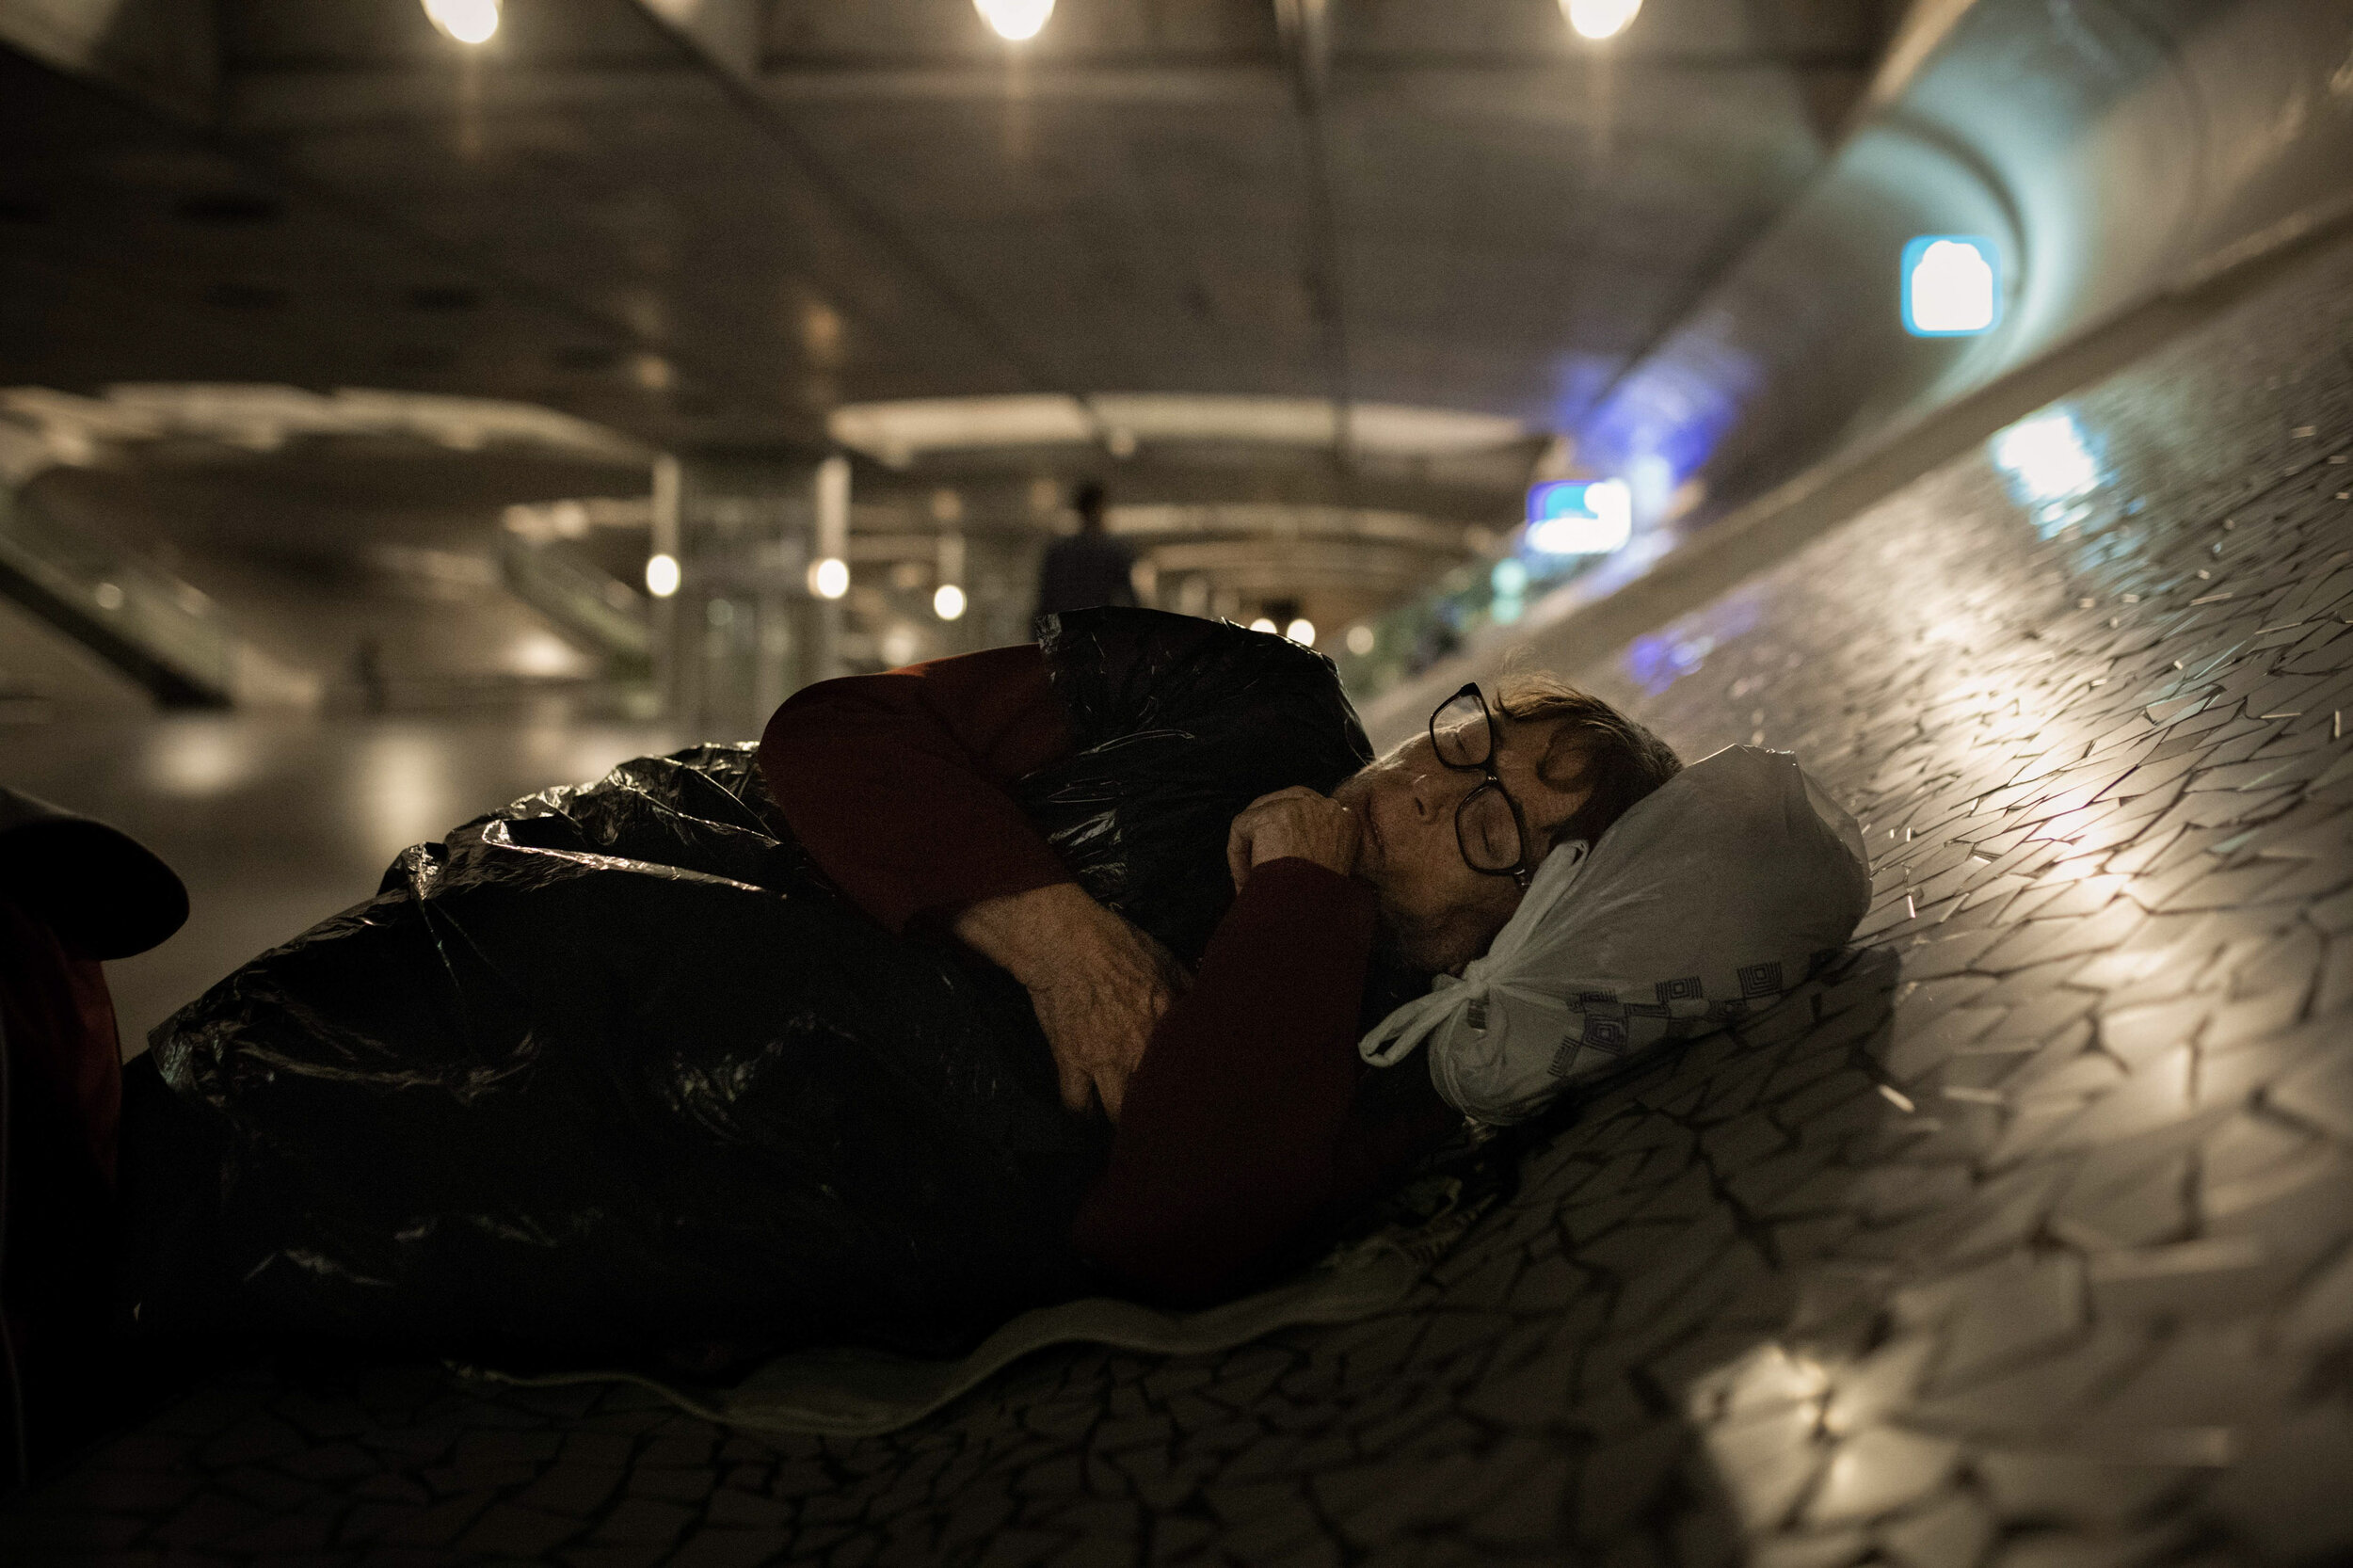  24th of September 2019   Maria Pereira, 78, gets ready for another sleepless night in Gare do Oriente, Lisbon. She was put out on the streets by her landlord, who changed the lock on her door. For two weeks she was sleeping in Lisbon's streets and i